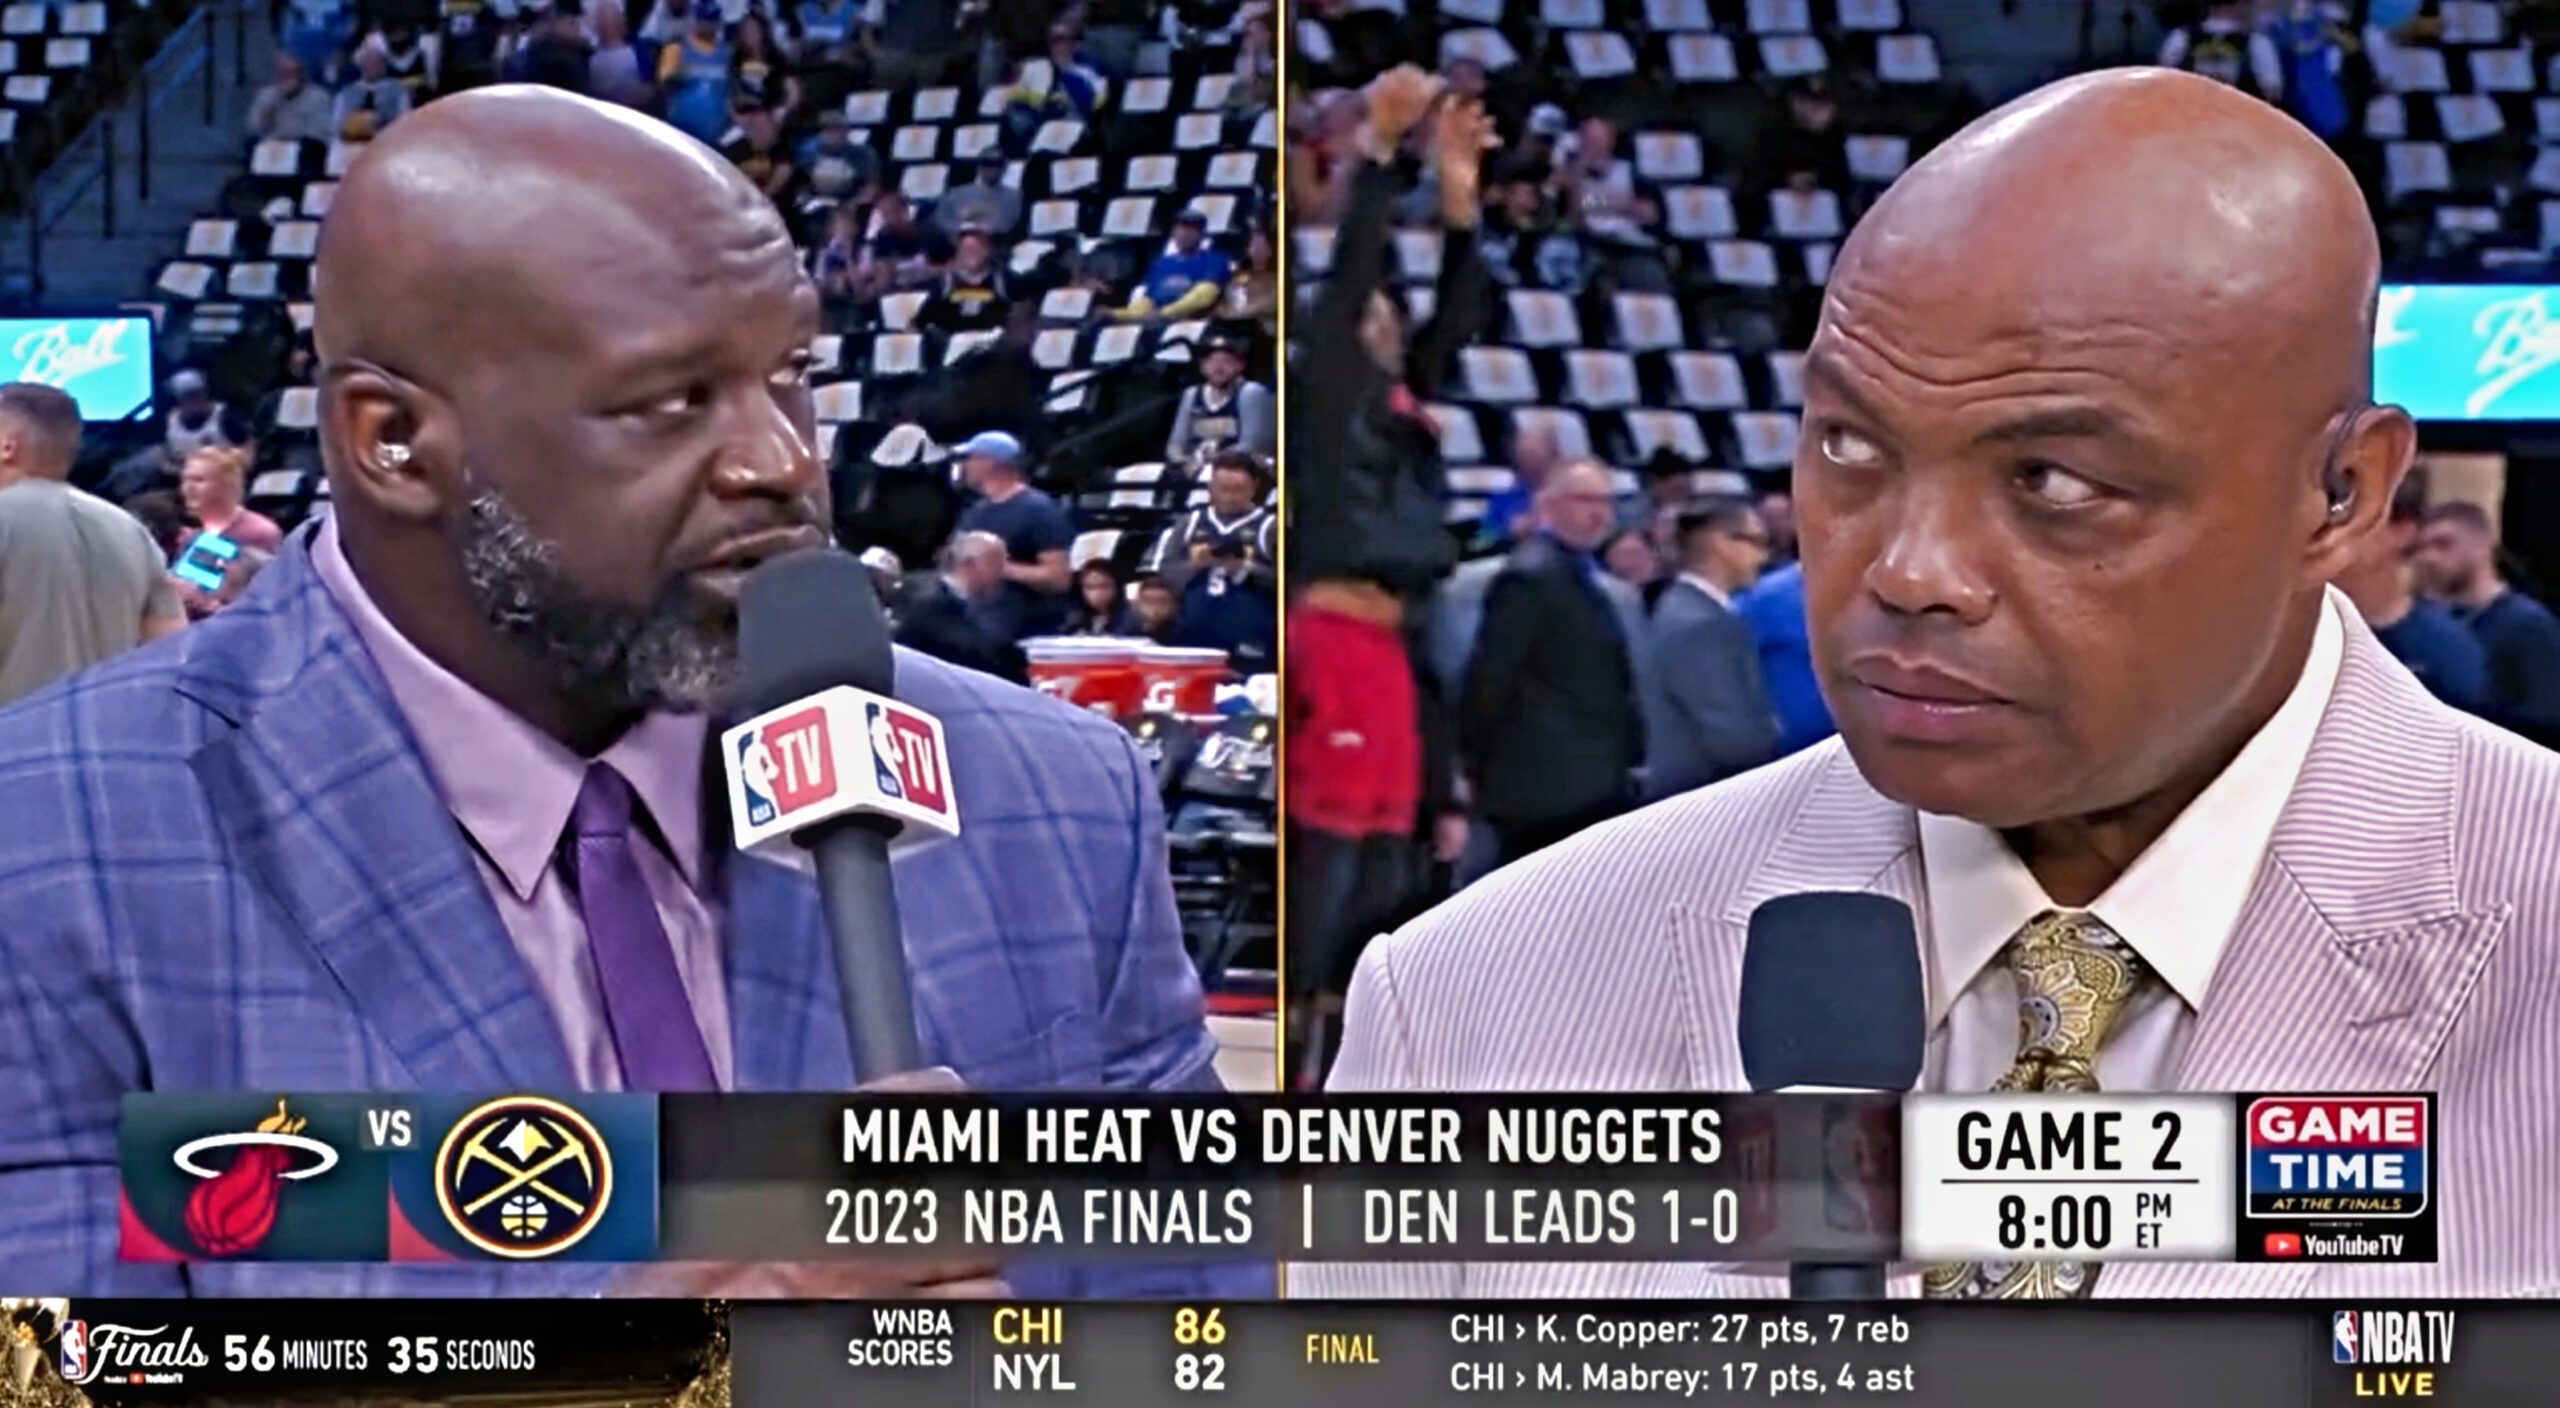 Video: Charles Barkley, Shaquille O'Neal Got Physical Sunday Night